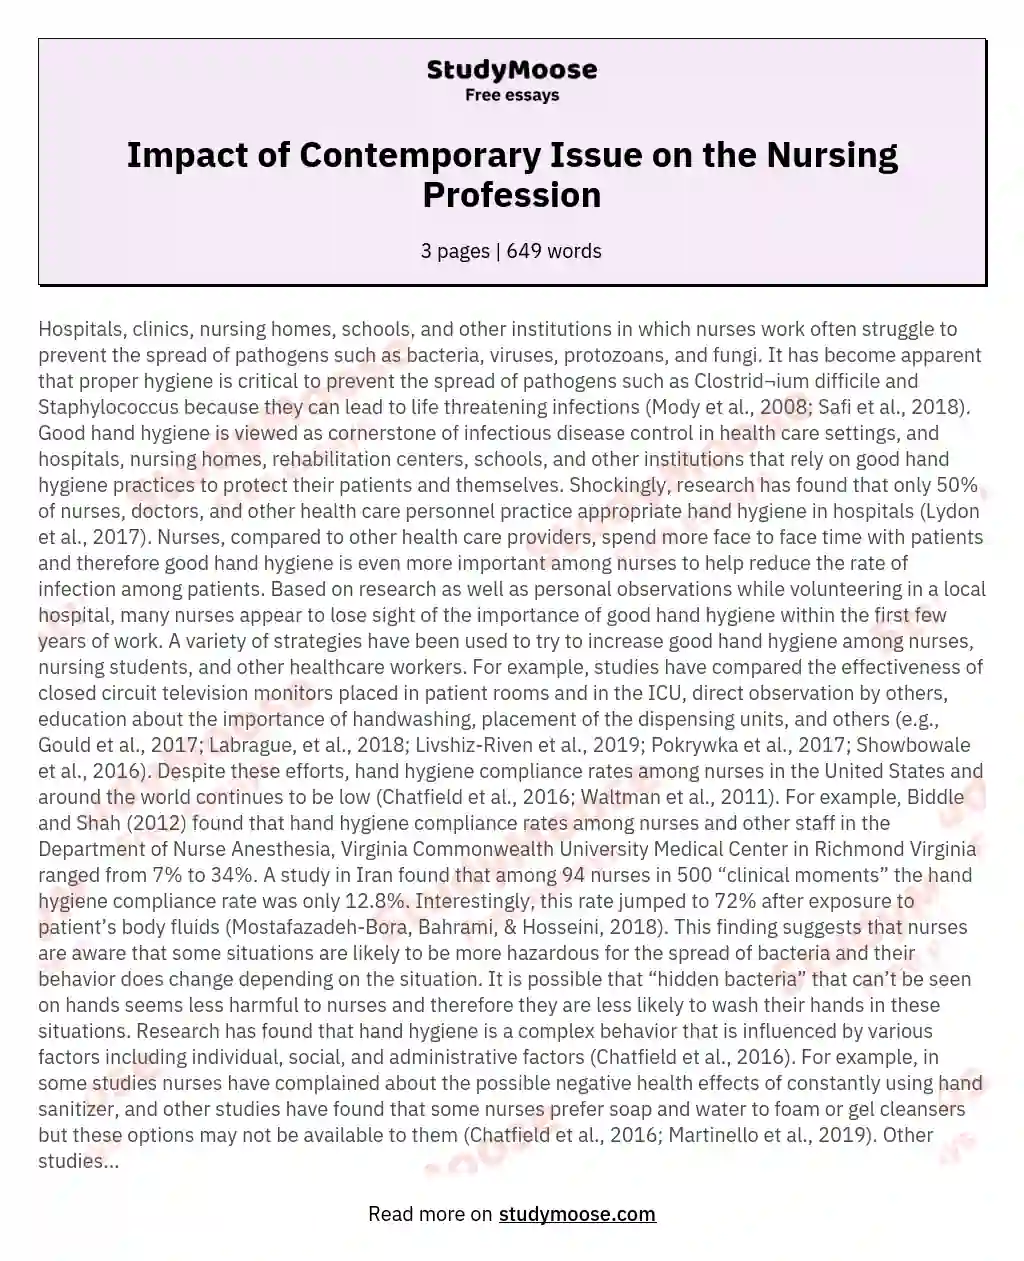 Impact of Contemporary Issue on the Nursing Profession essay